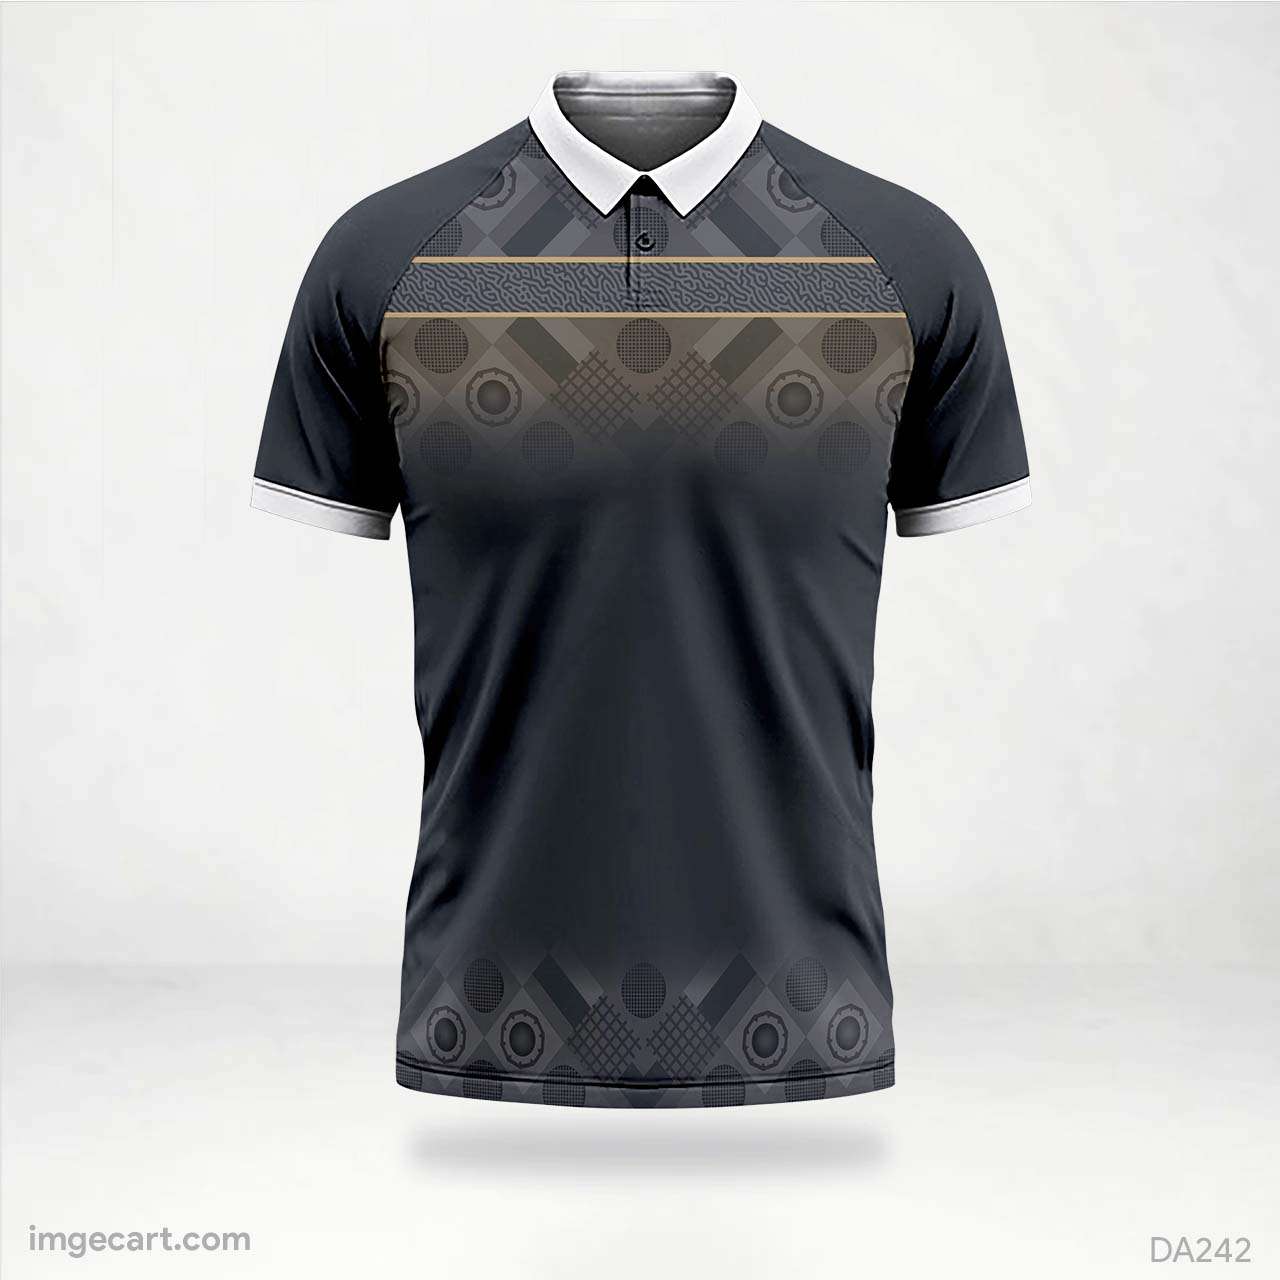 Cricket Jersey Design Grey and with pattern - imgecart